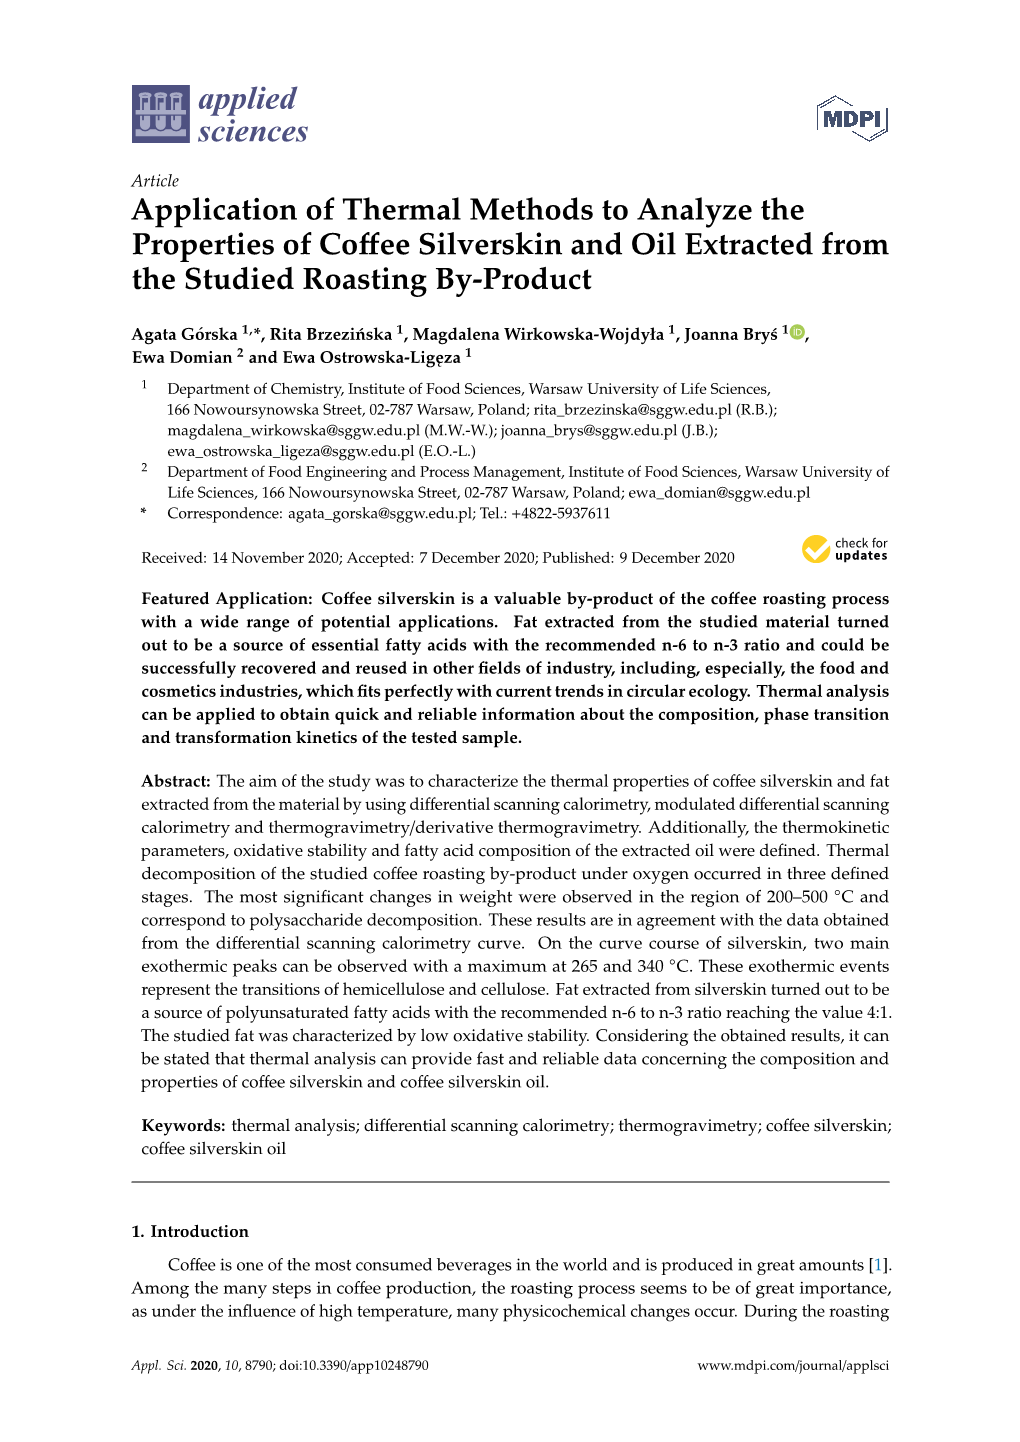 Application of Thermal Methods to Analyze the Properties of Coffee Silverskin and Oil Extracted from the Studied Roasting By-Pro